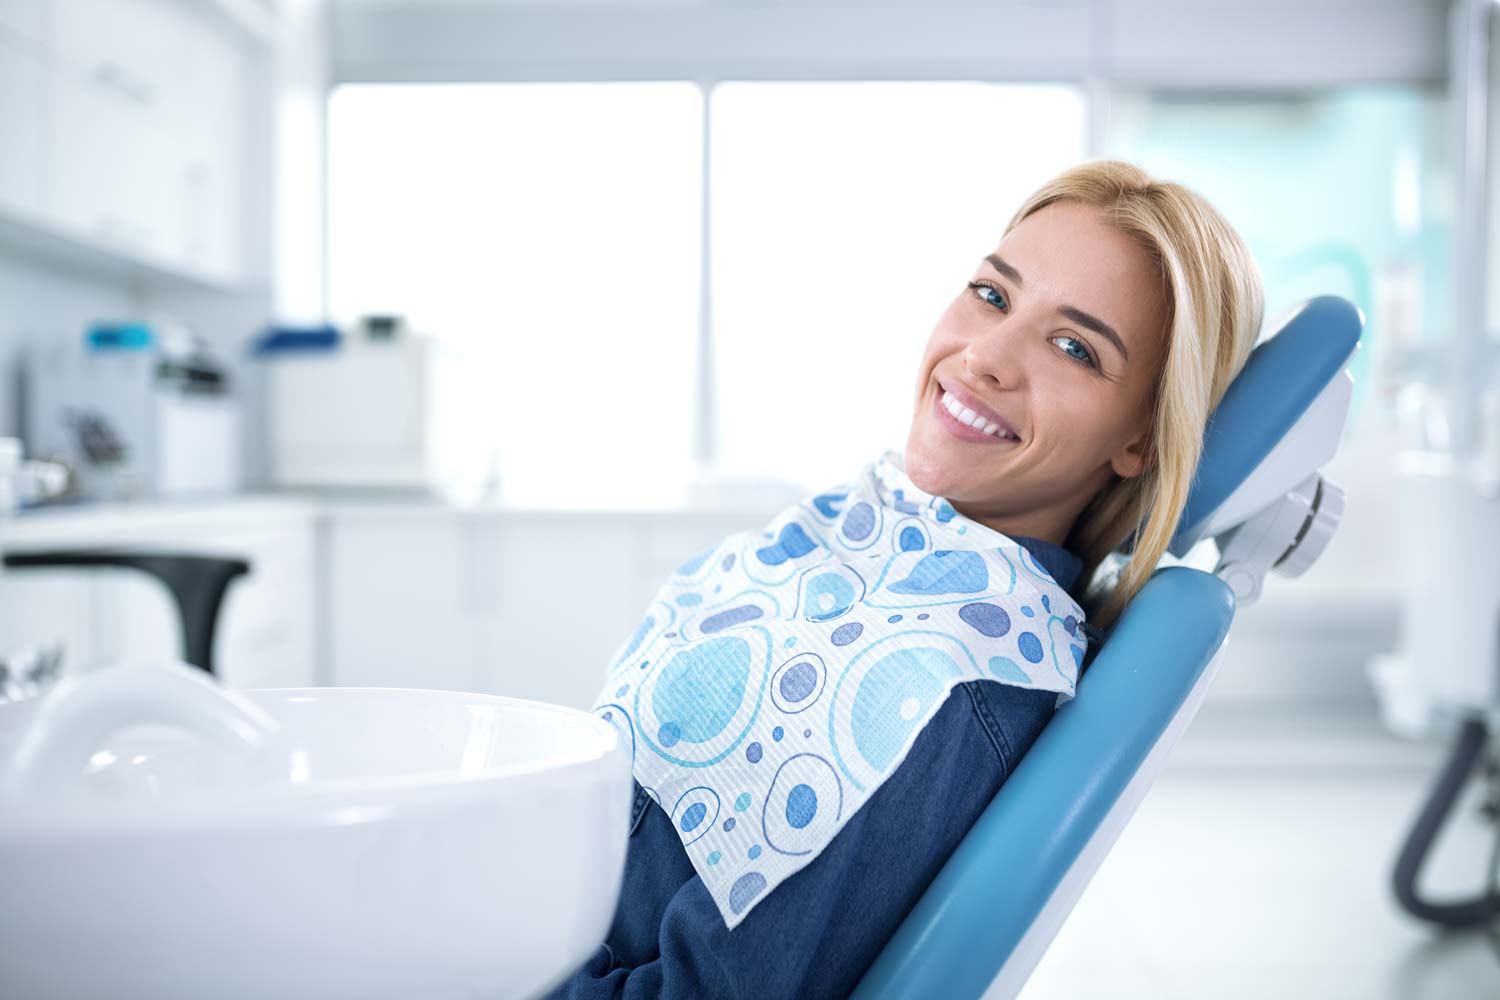 Woman sitting in dentist chair wearing bib with turned head smiles at the camera.